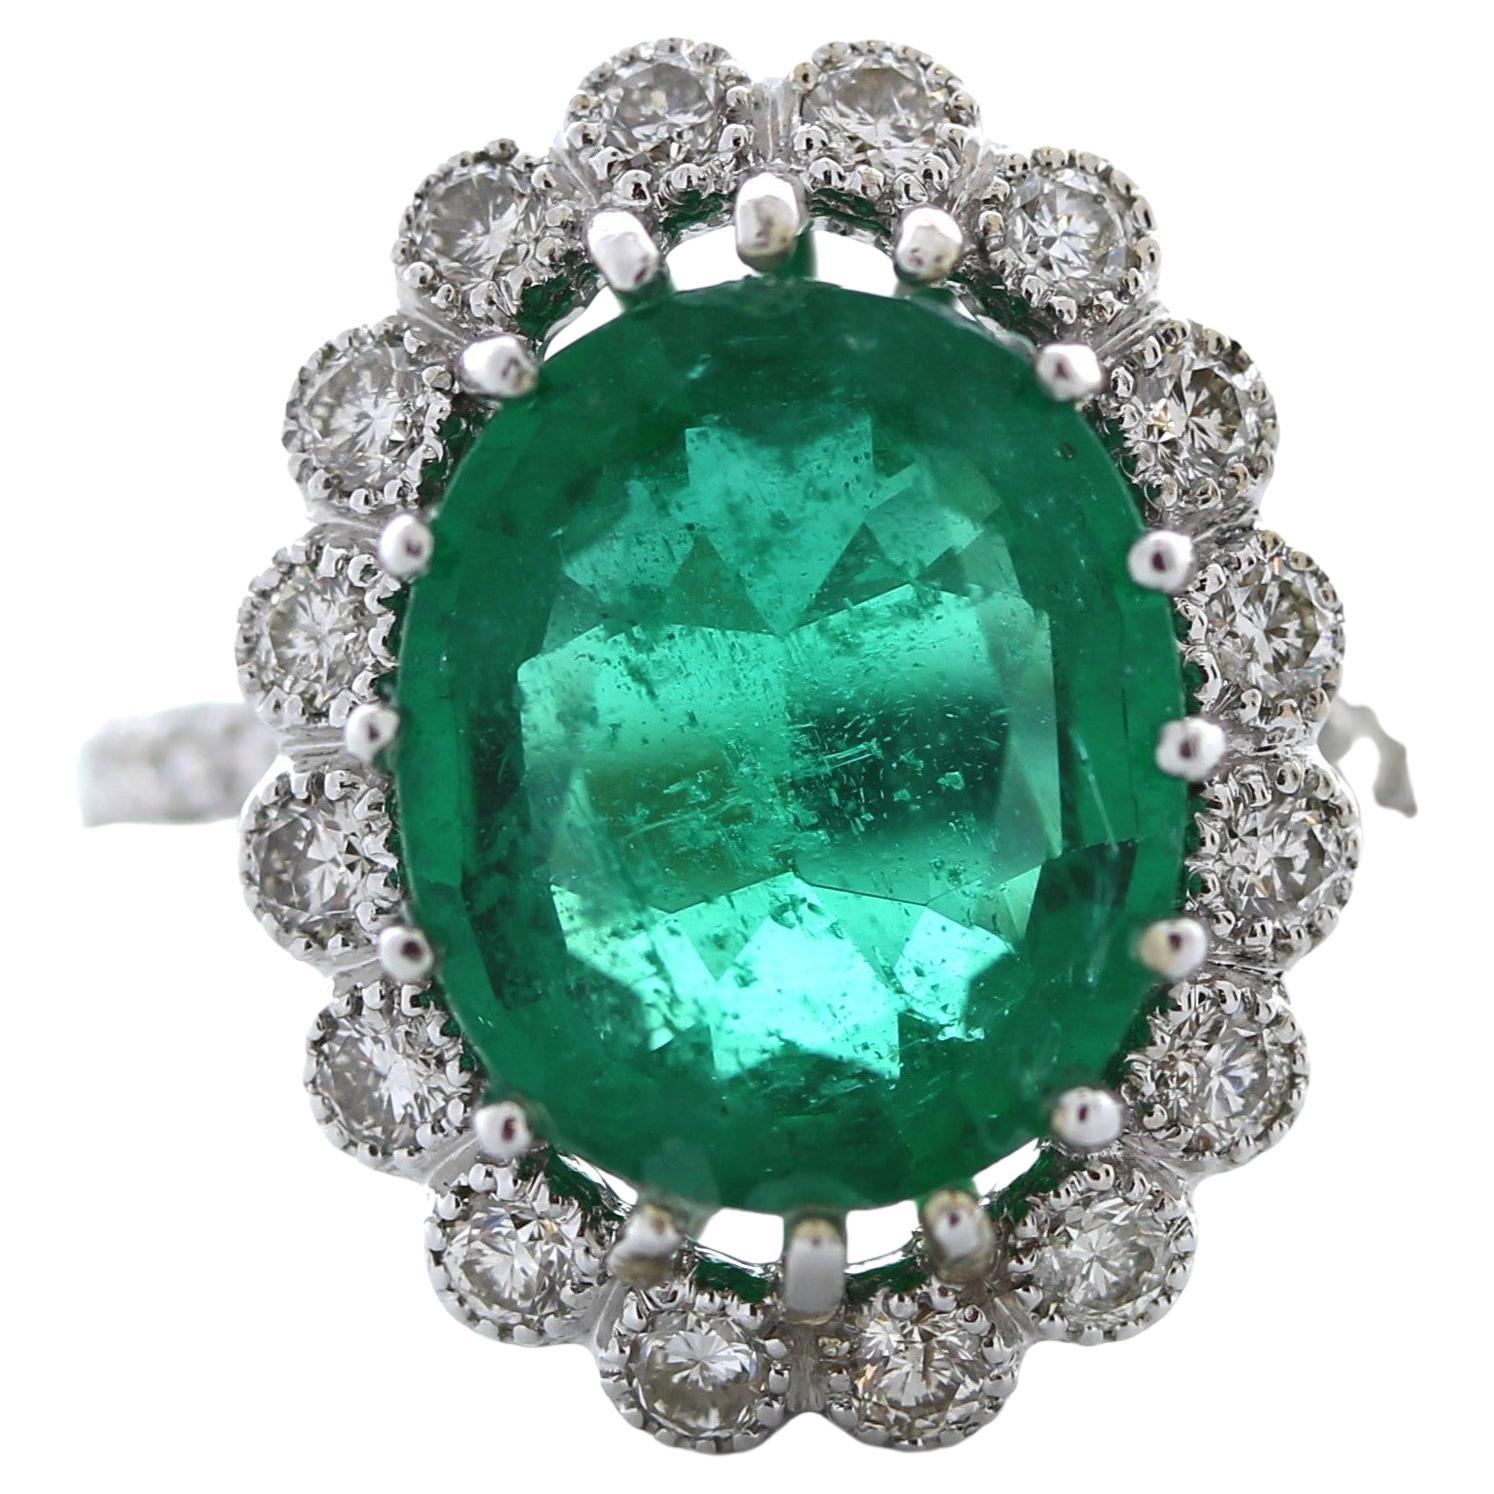 4.46 Carat Green Emerald Oval Shape & Diamond Ring in 14k White Gold For Sale